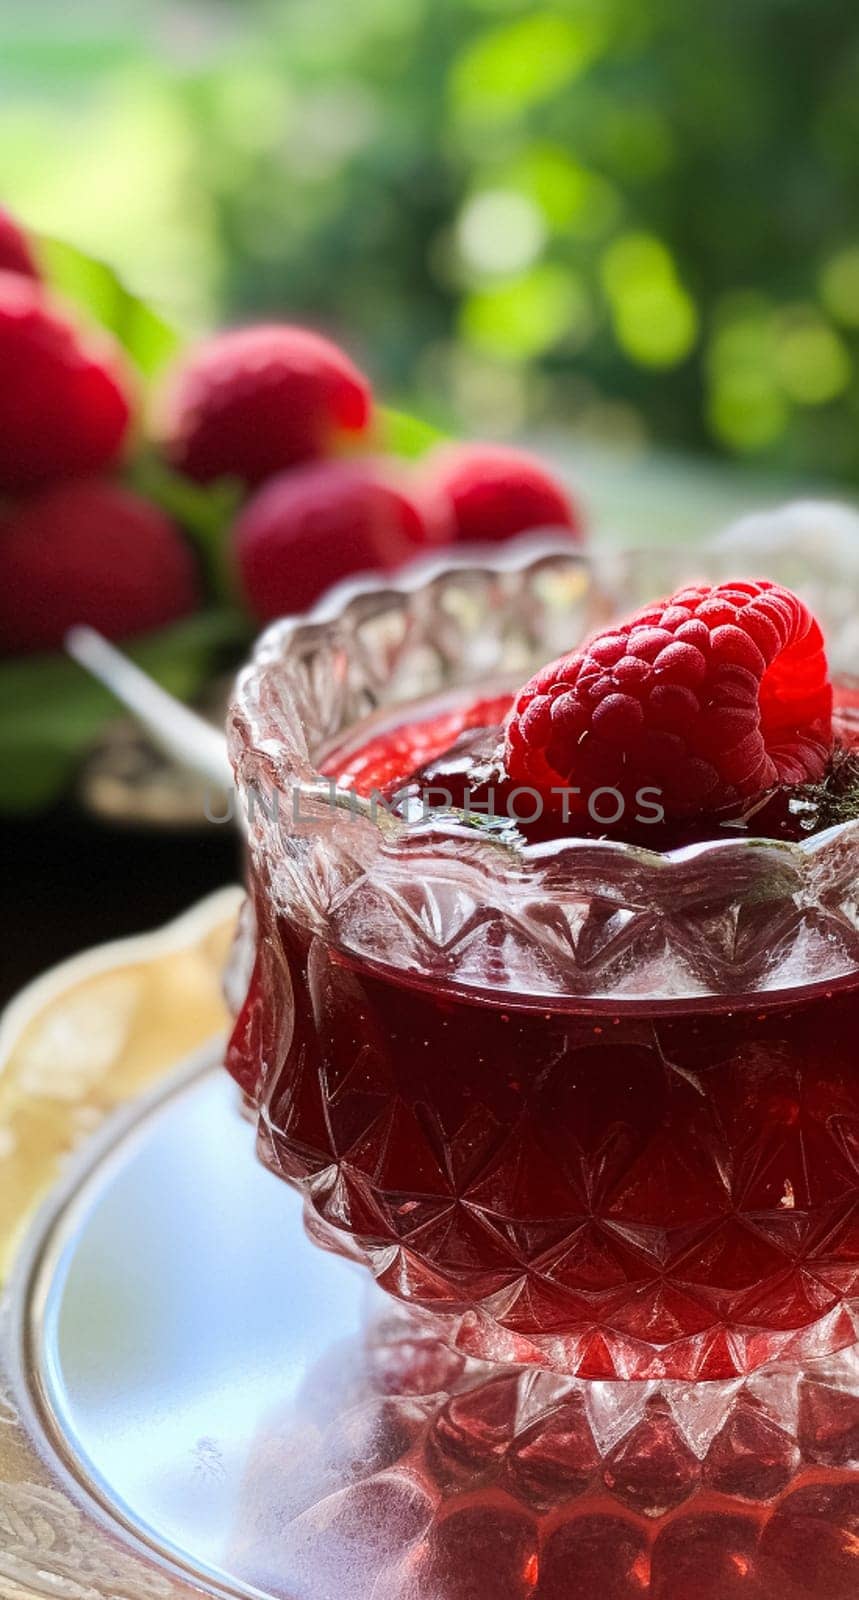 Raspberry jam and raspberries in a crystal bowl, country food and English recipe idea for menu, food blog and cookbook inspiration